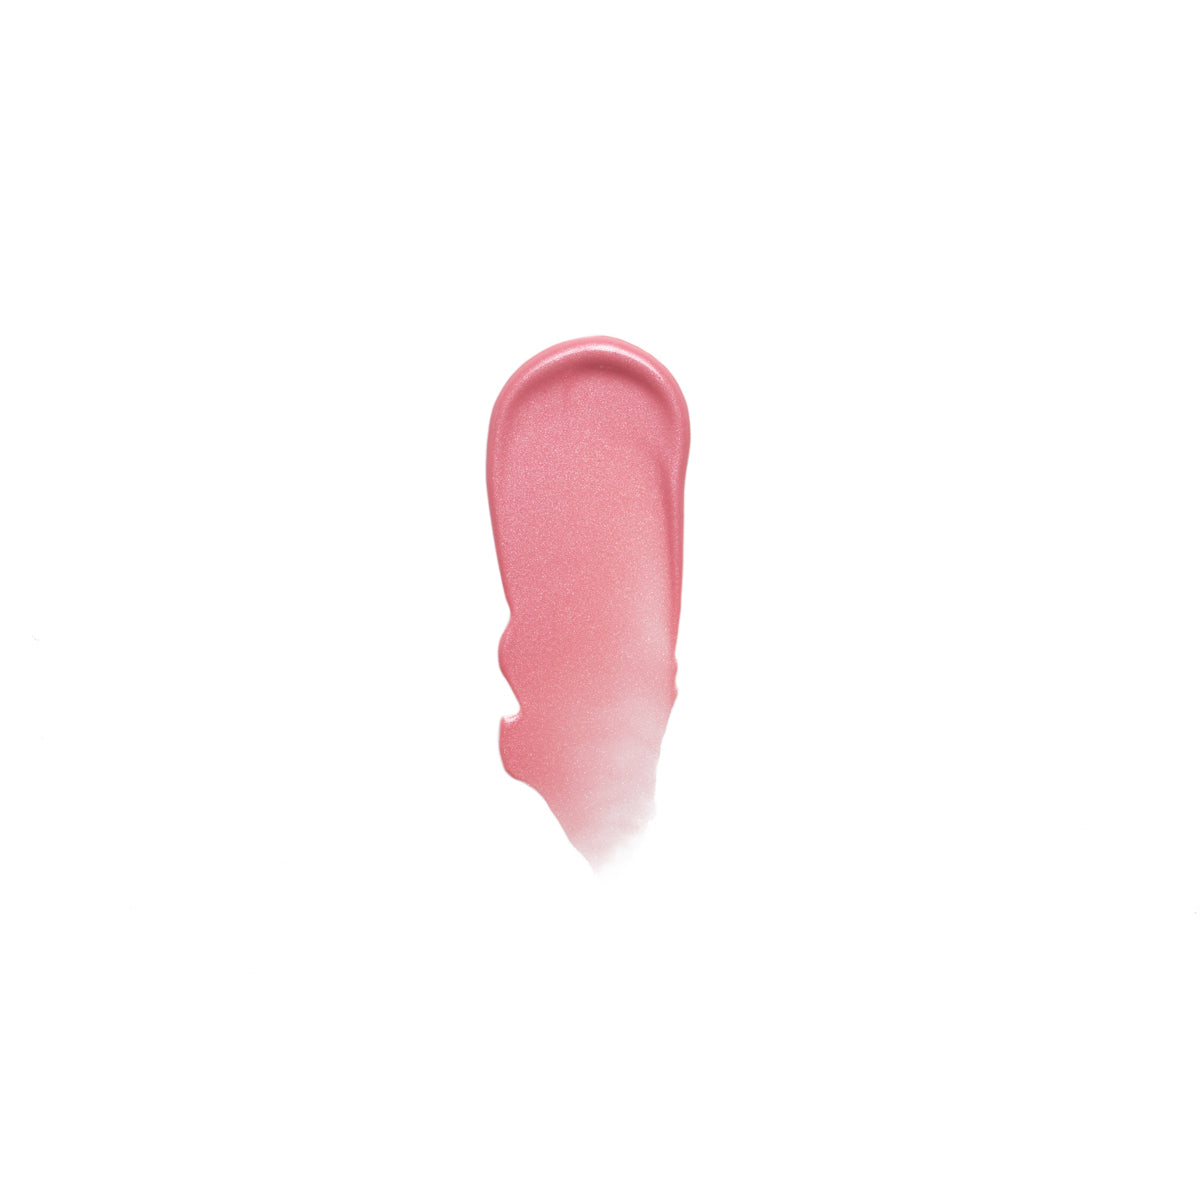 BARBE A PAPA - COOL BRIGHT PINK - swatch of vibrant liquid blush in barbe a papa